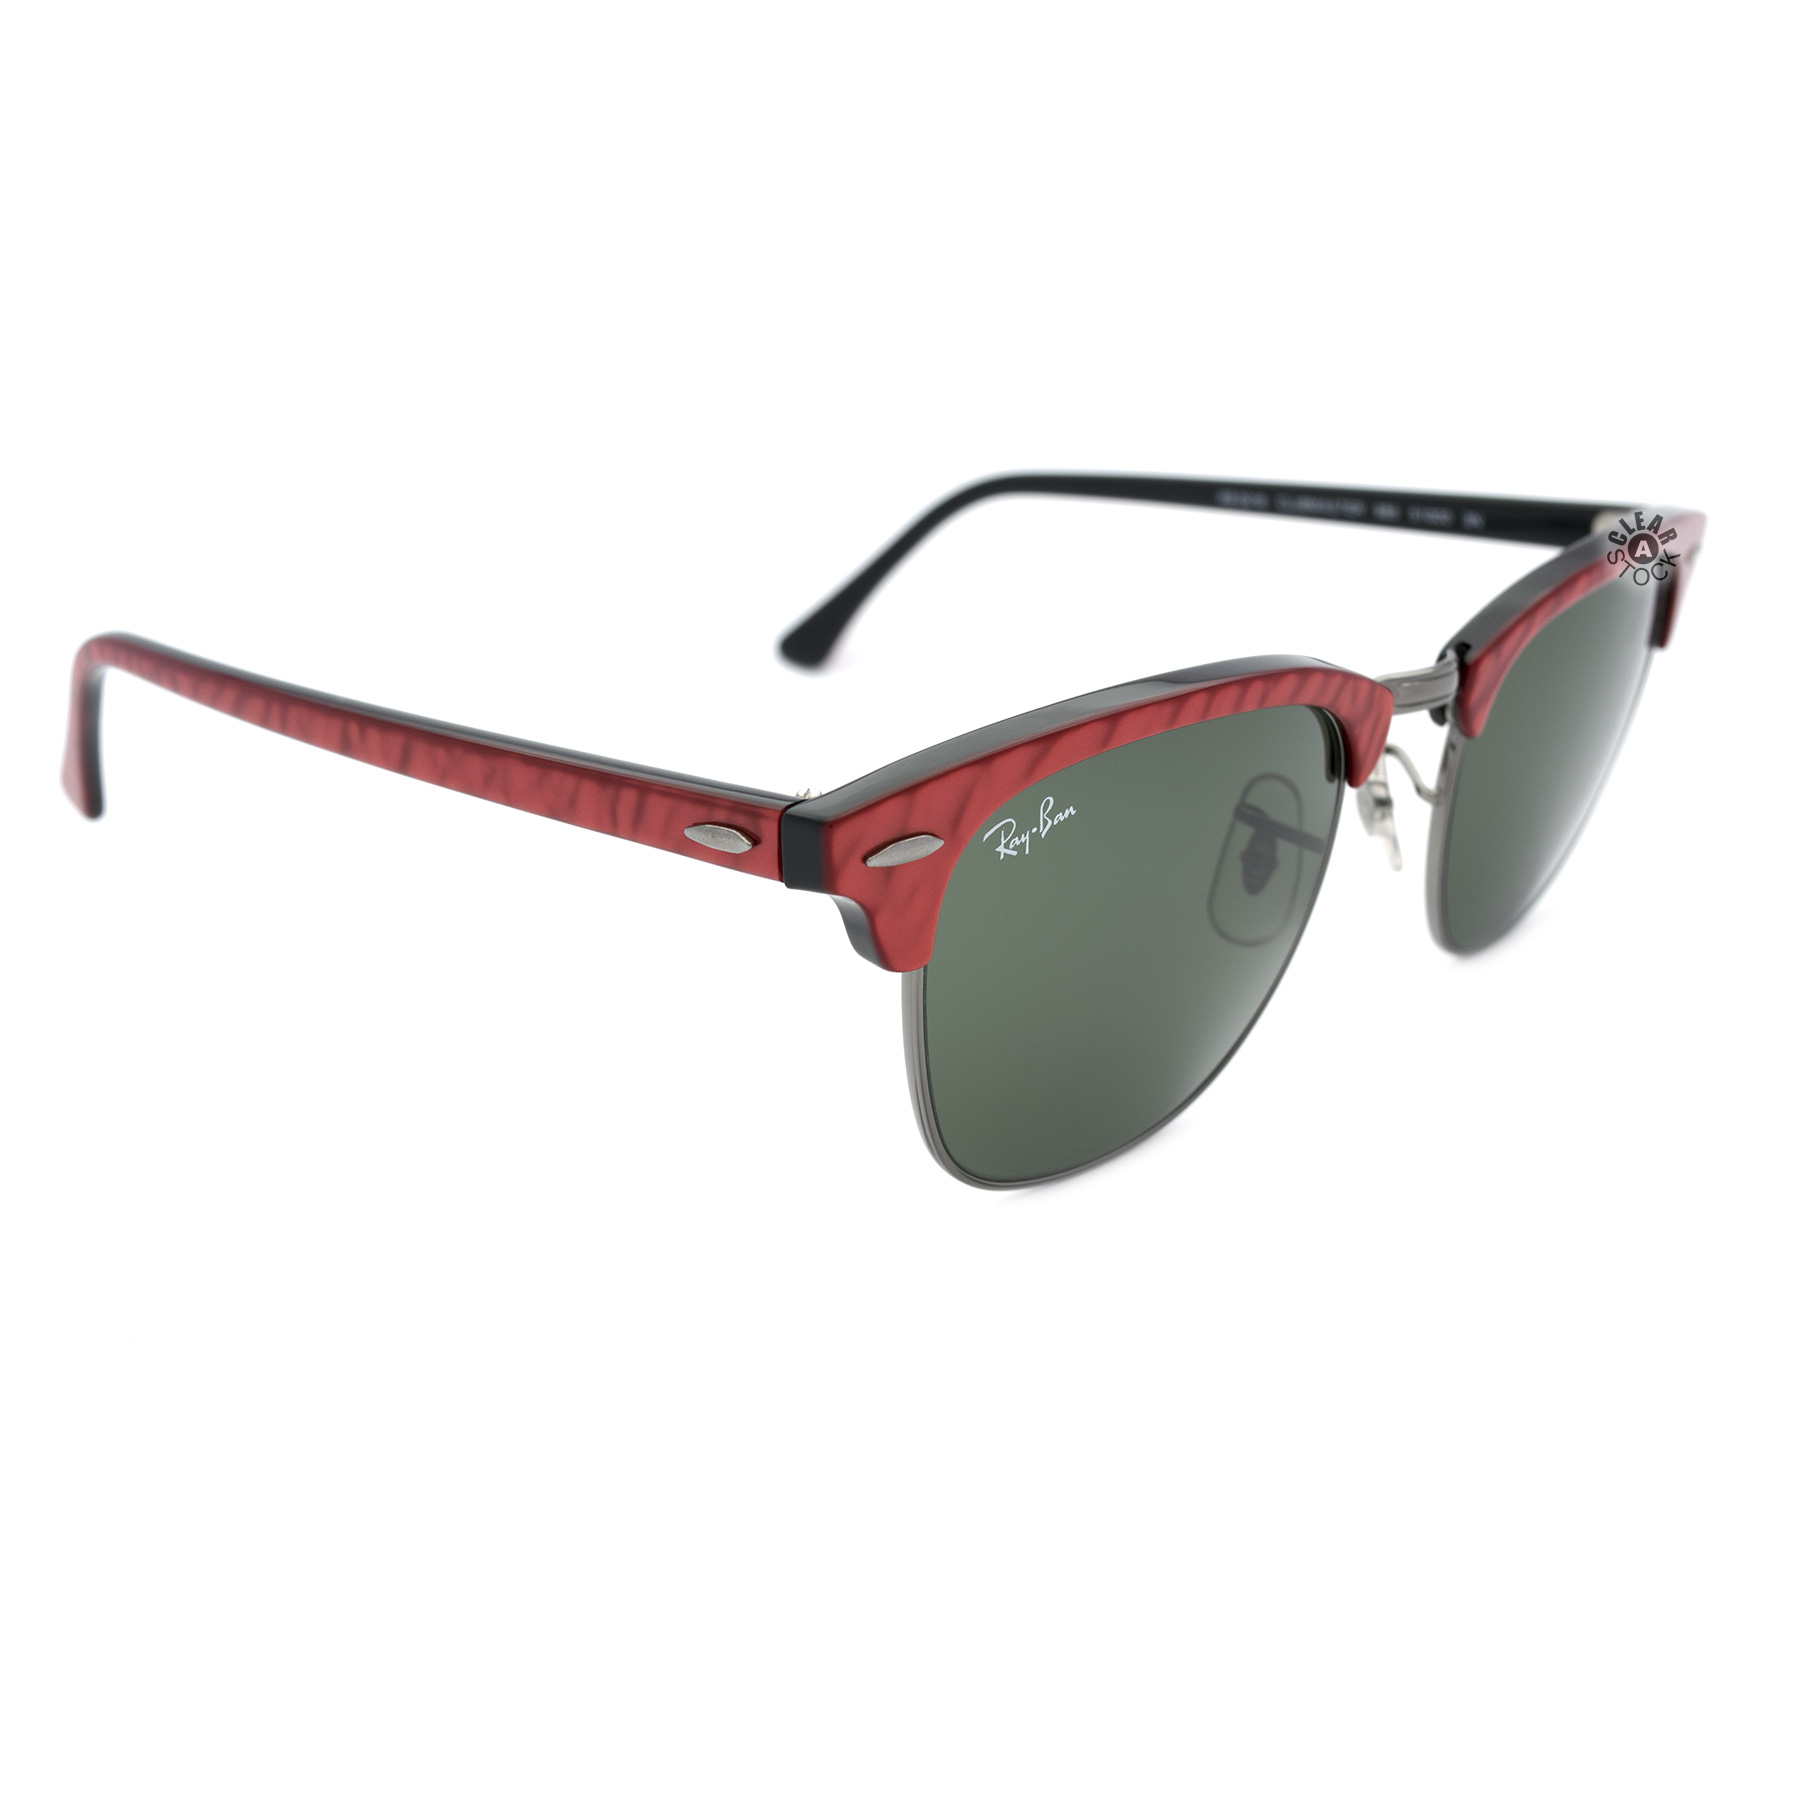 Ray Ban Clubmaster Rb3016 985 Sunglasses Red Crystal Green 51mm Usa